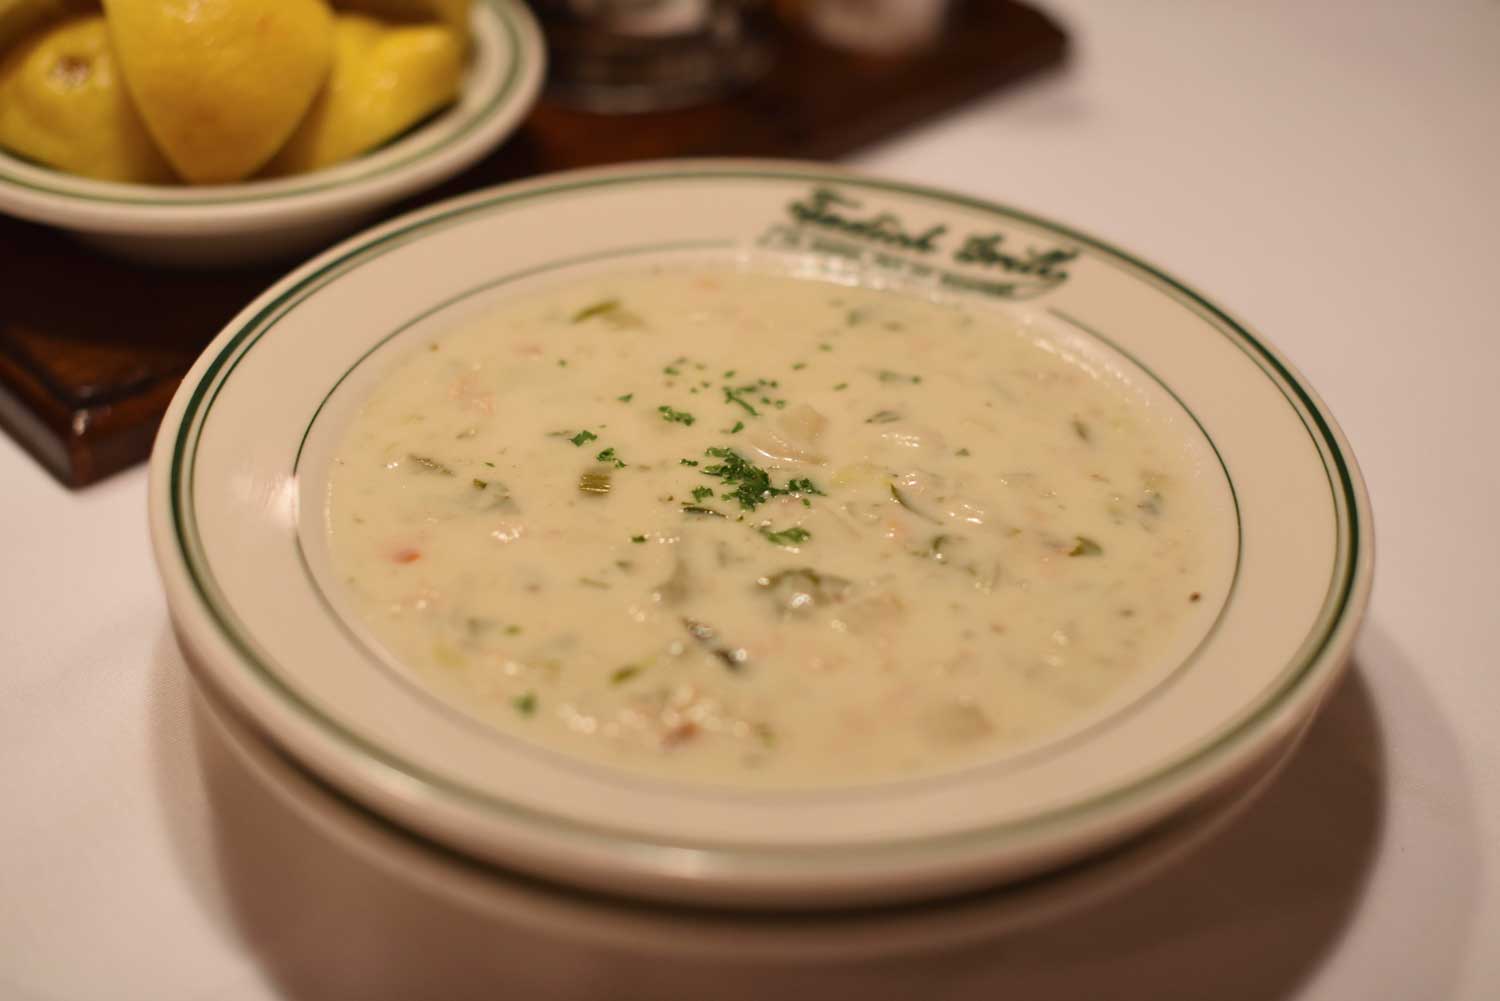 The white clam chowder at Tadich Grill often sells out nightly.